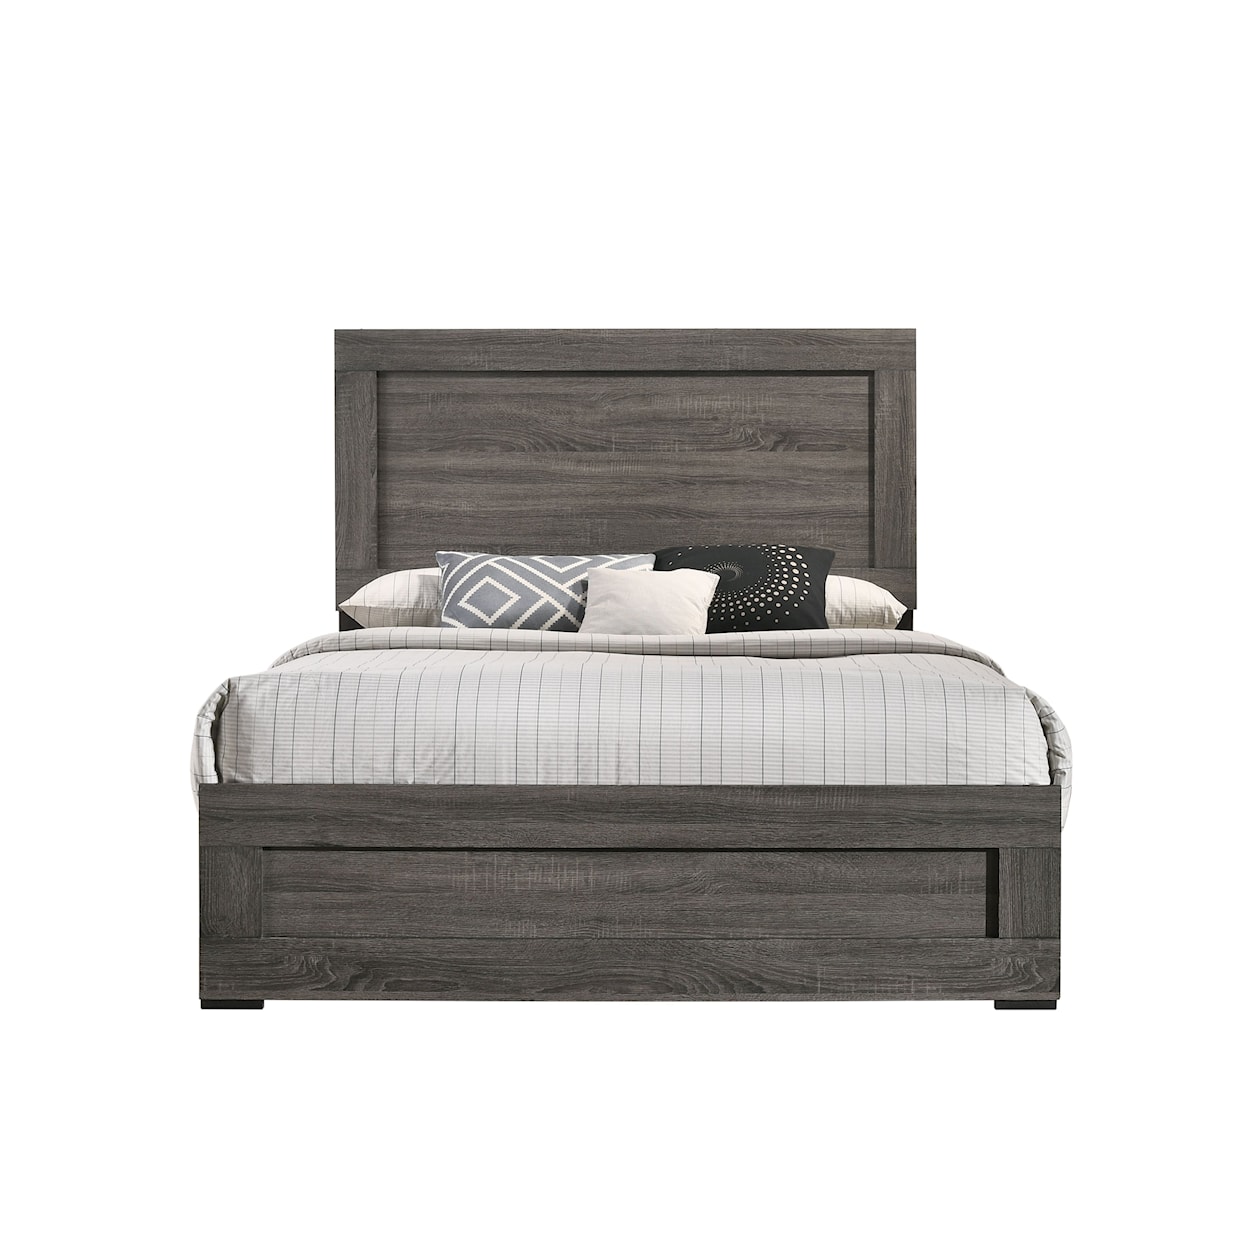 Lifestyle 8321A Full Bed